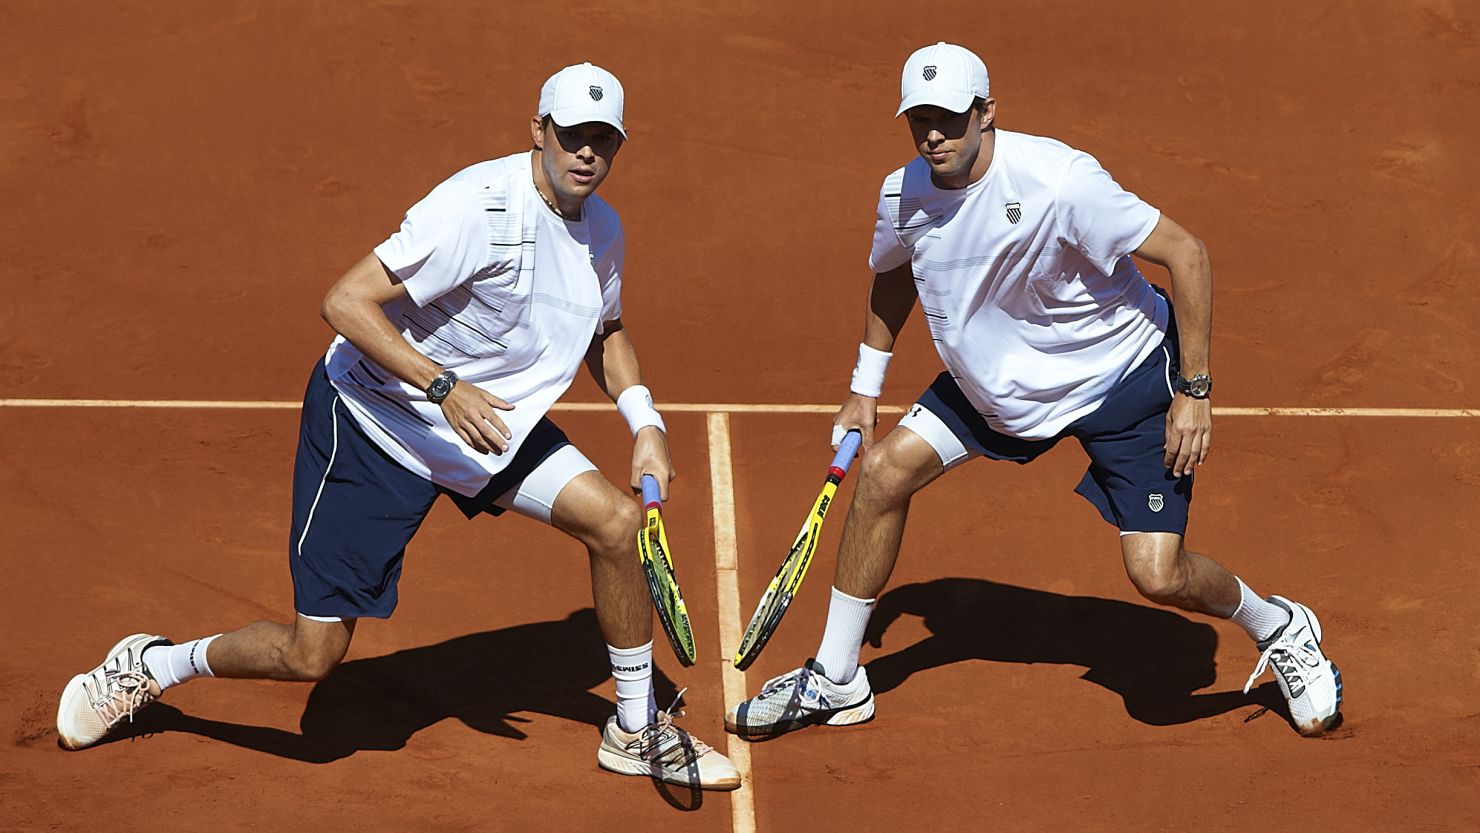 The Bryan brothers recorded their 20th victory in Davis Cup competition in Gijon on Saturday 